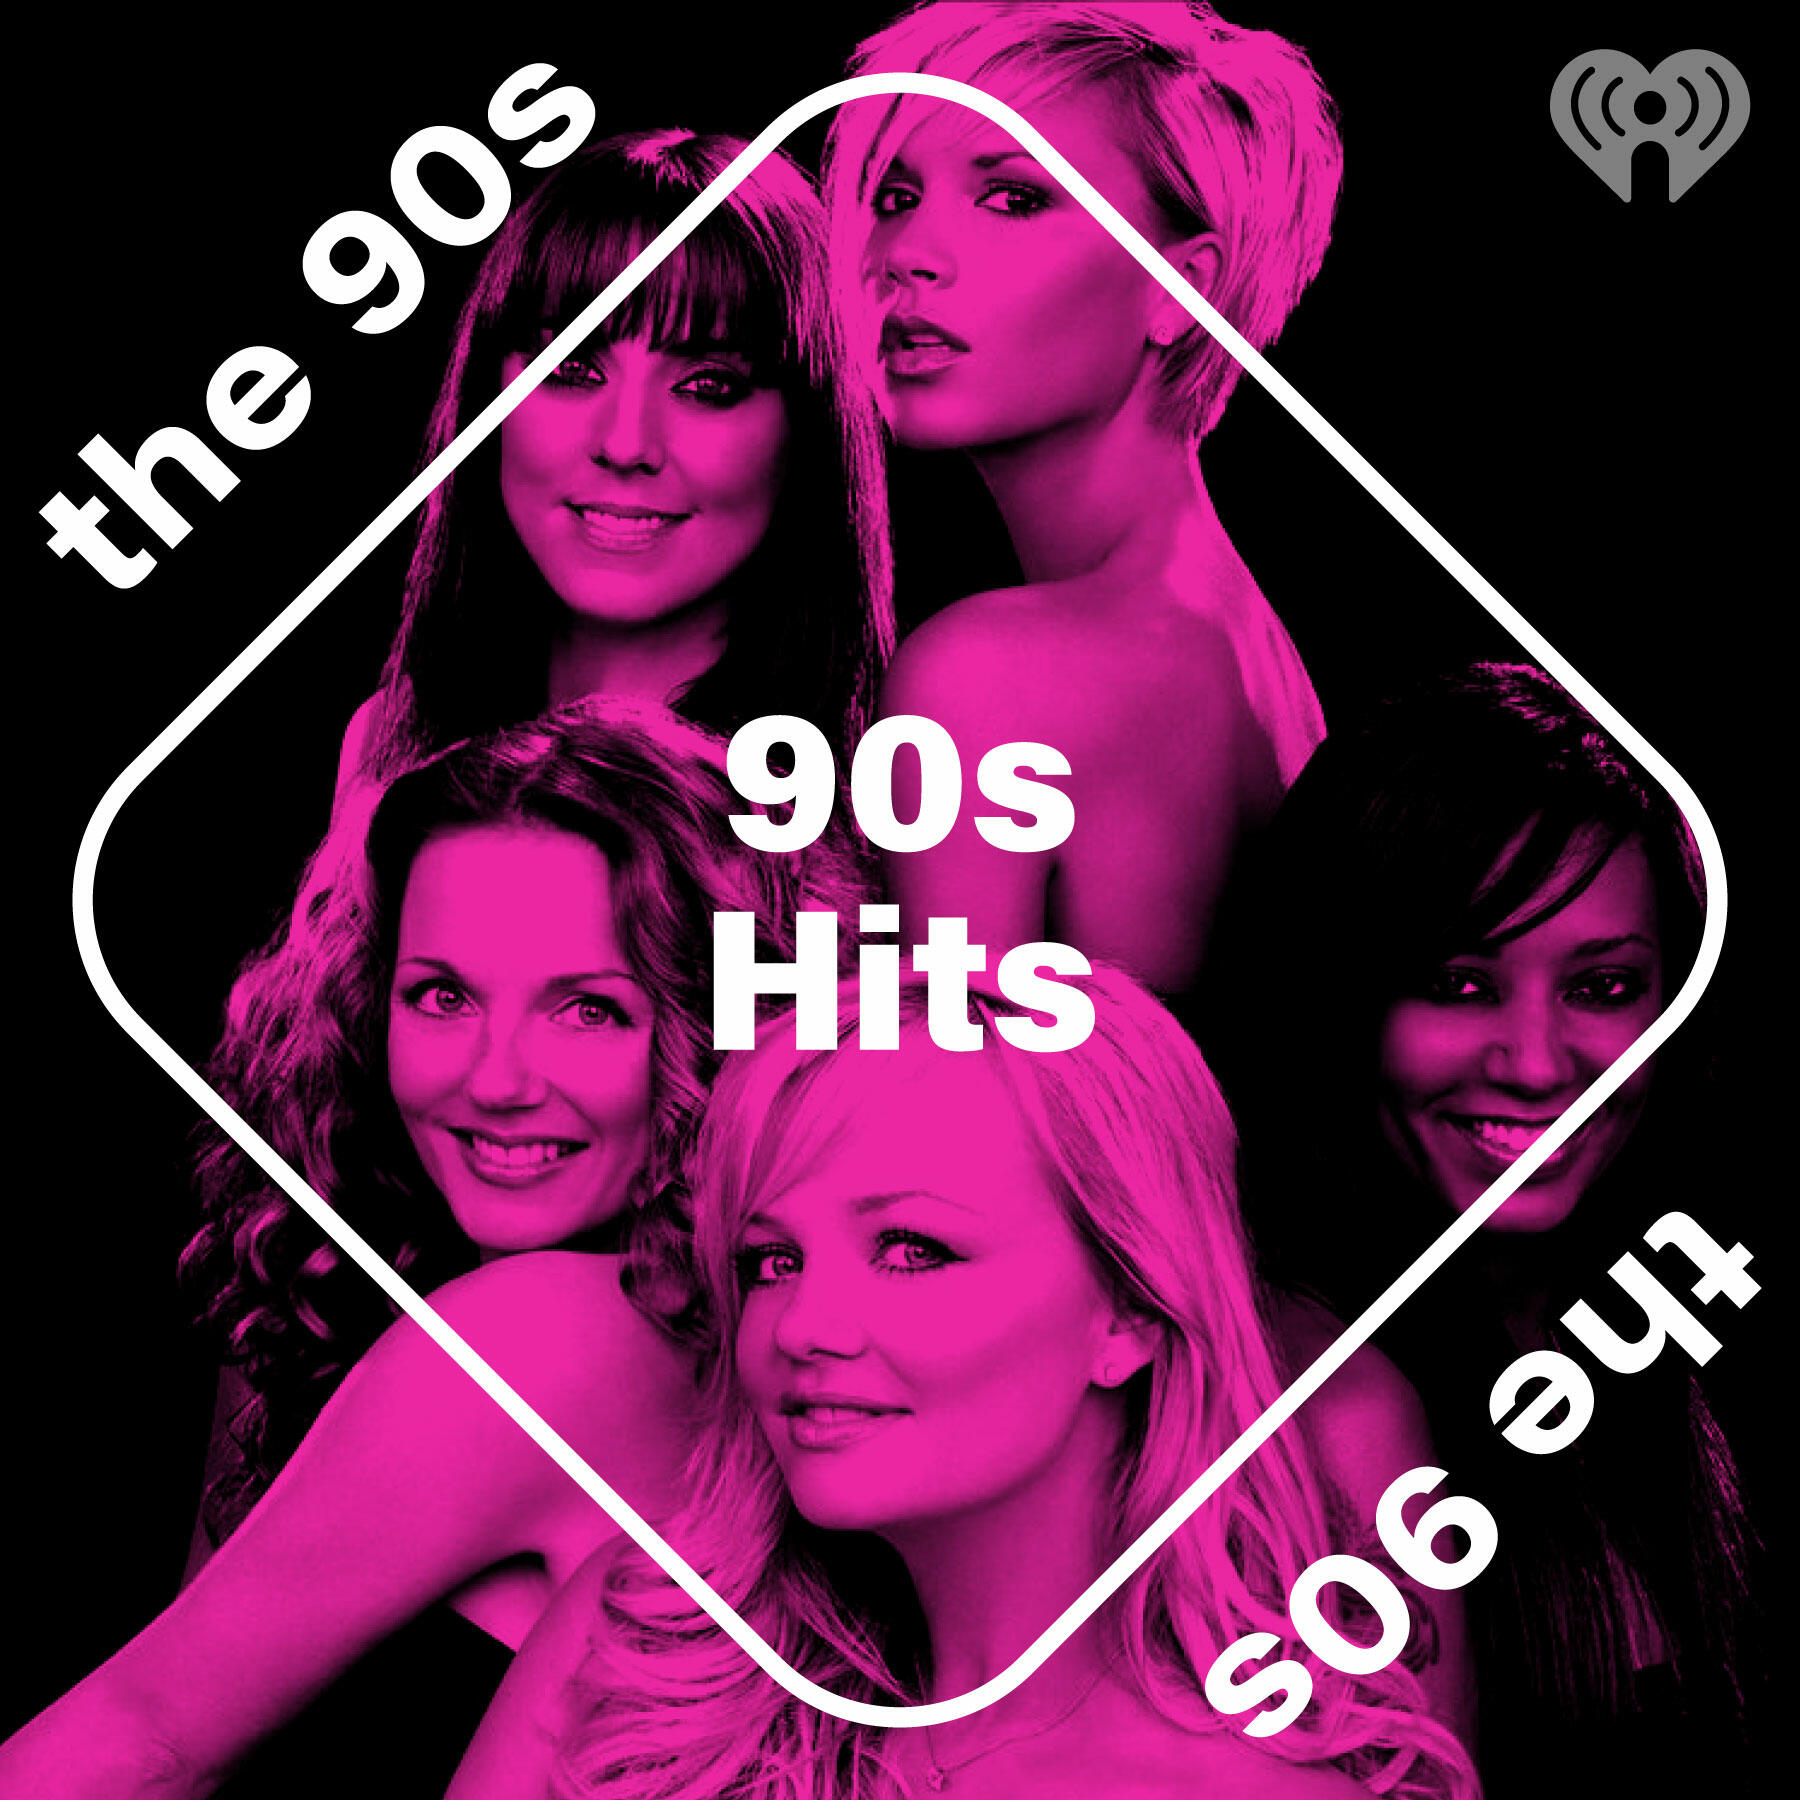 iheartradio 90s country